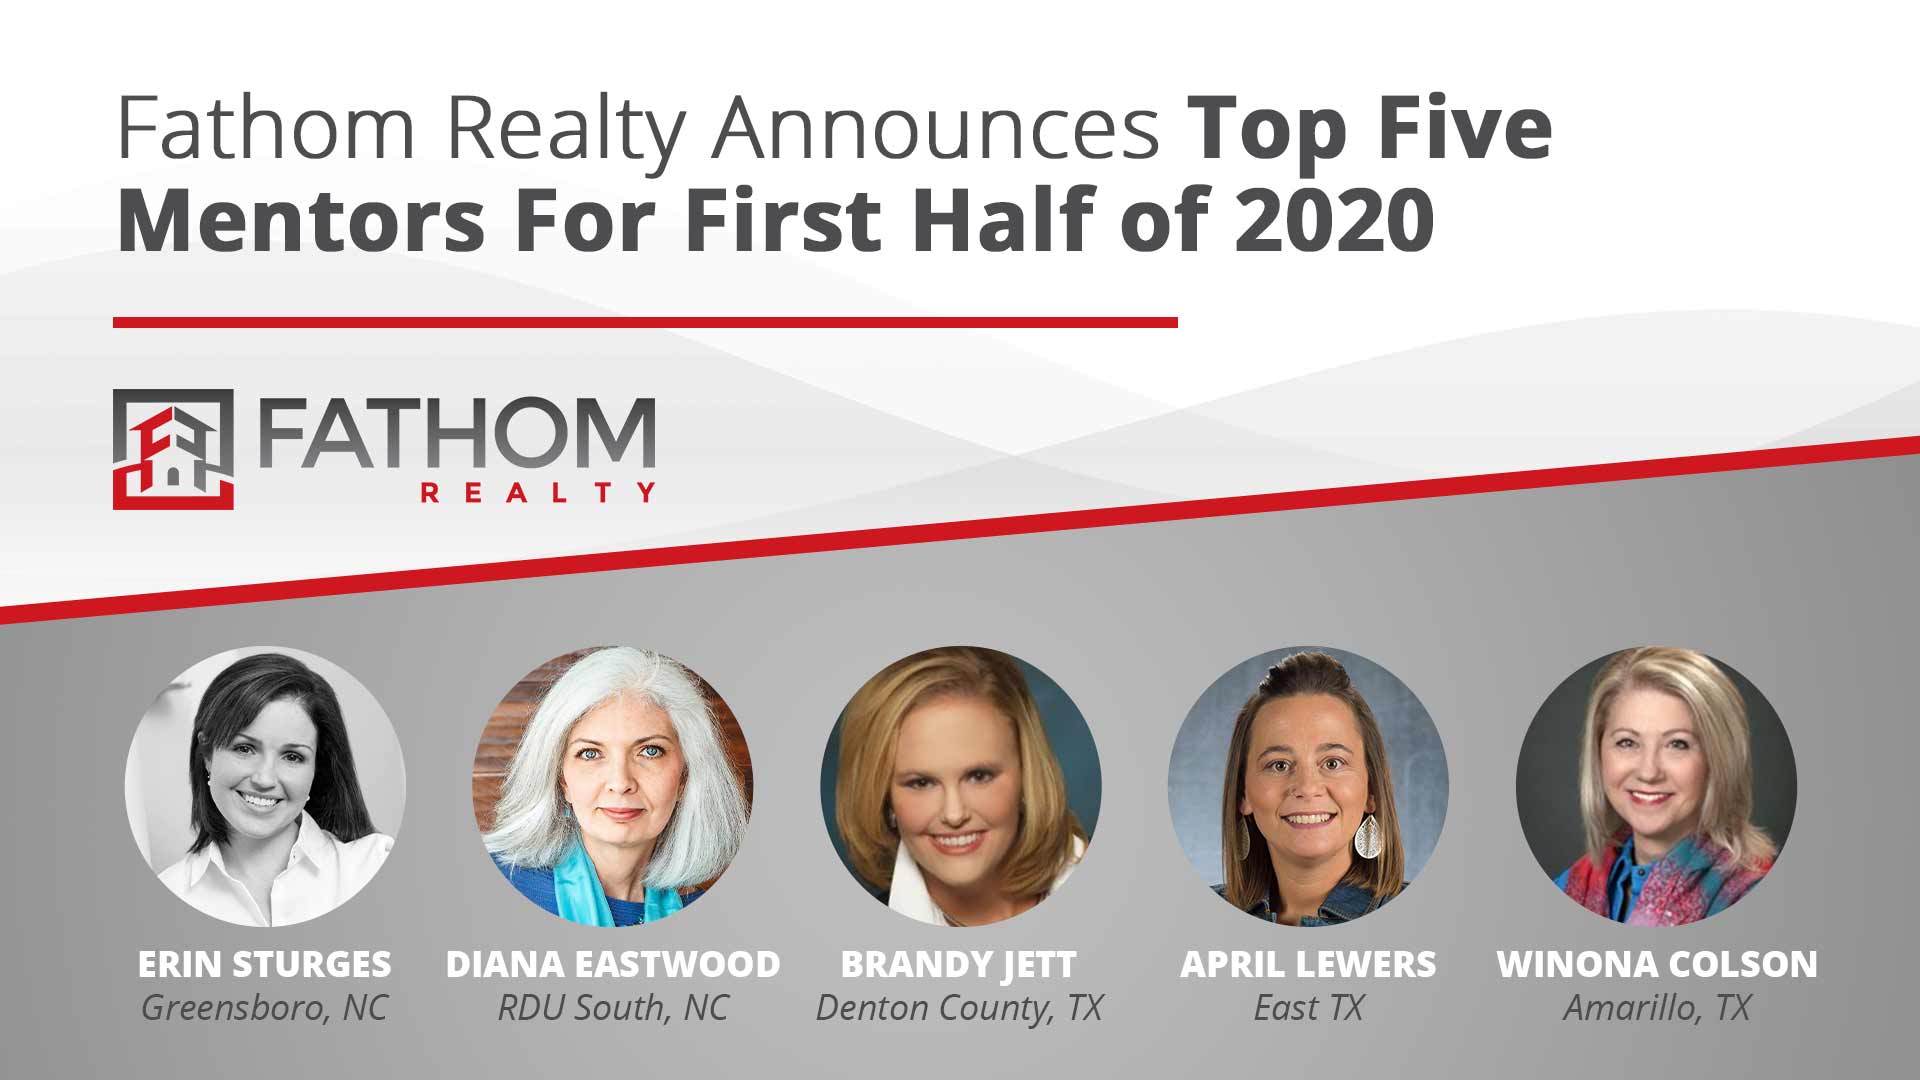 Featured image for “Fathom Realty Announces Top Five Mentors For First Half of 2020”